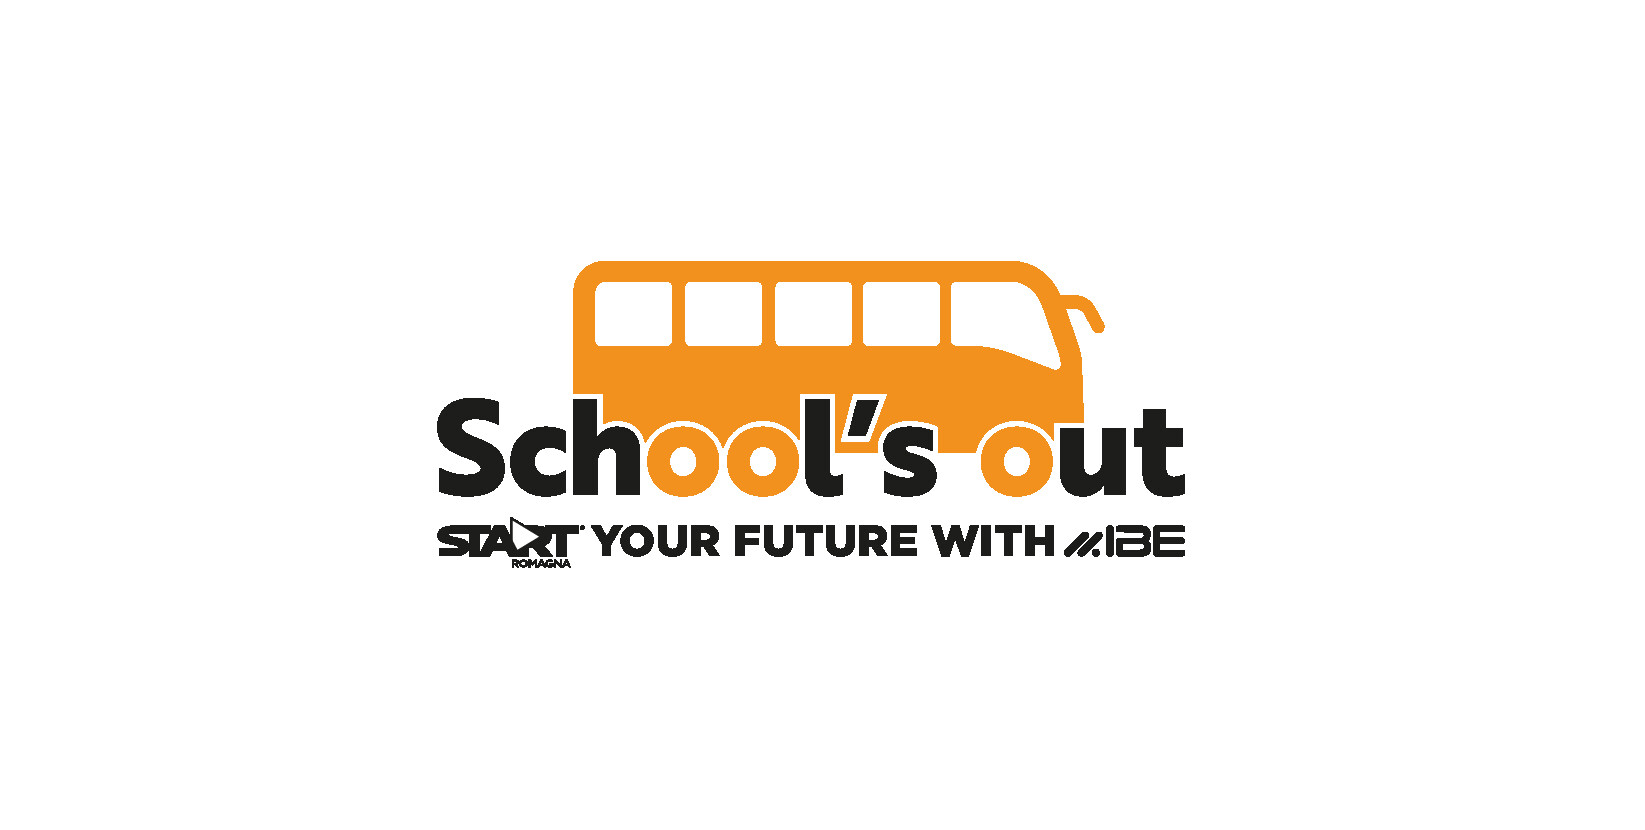 Formazione: a IBE Driving Experience il progetto School’s out, Start your Future with IBE